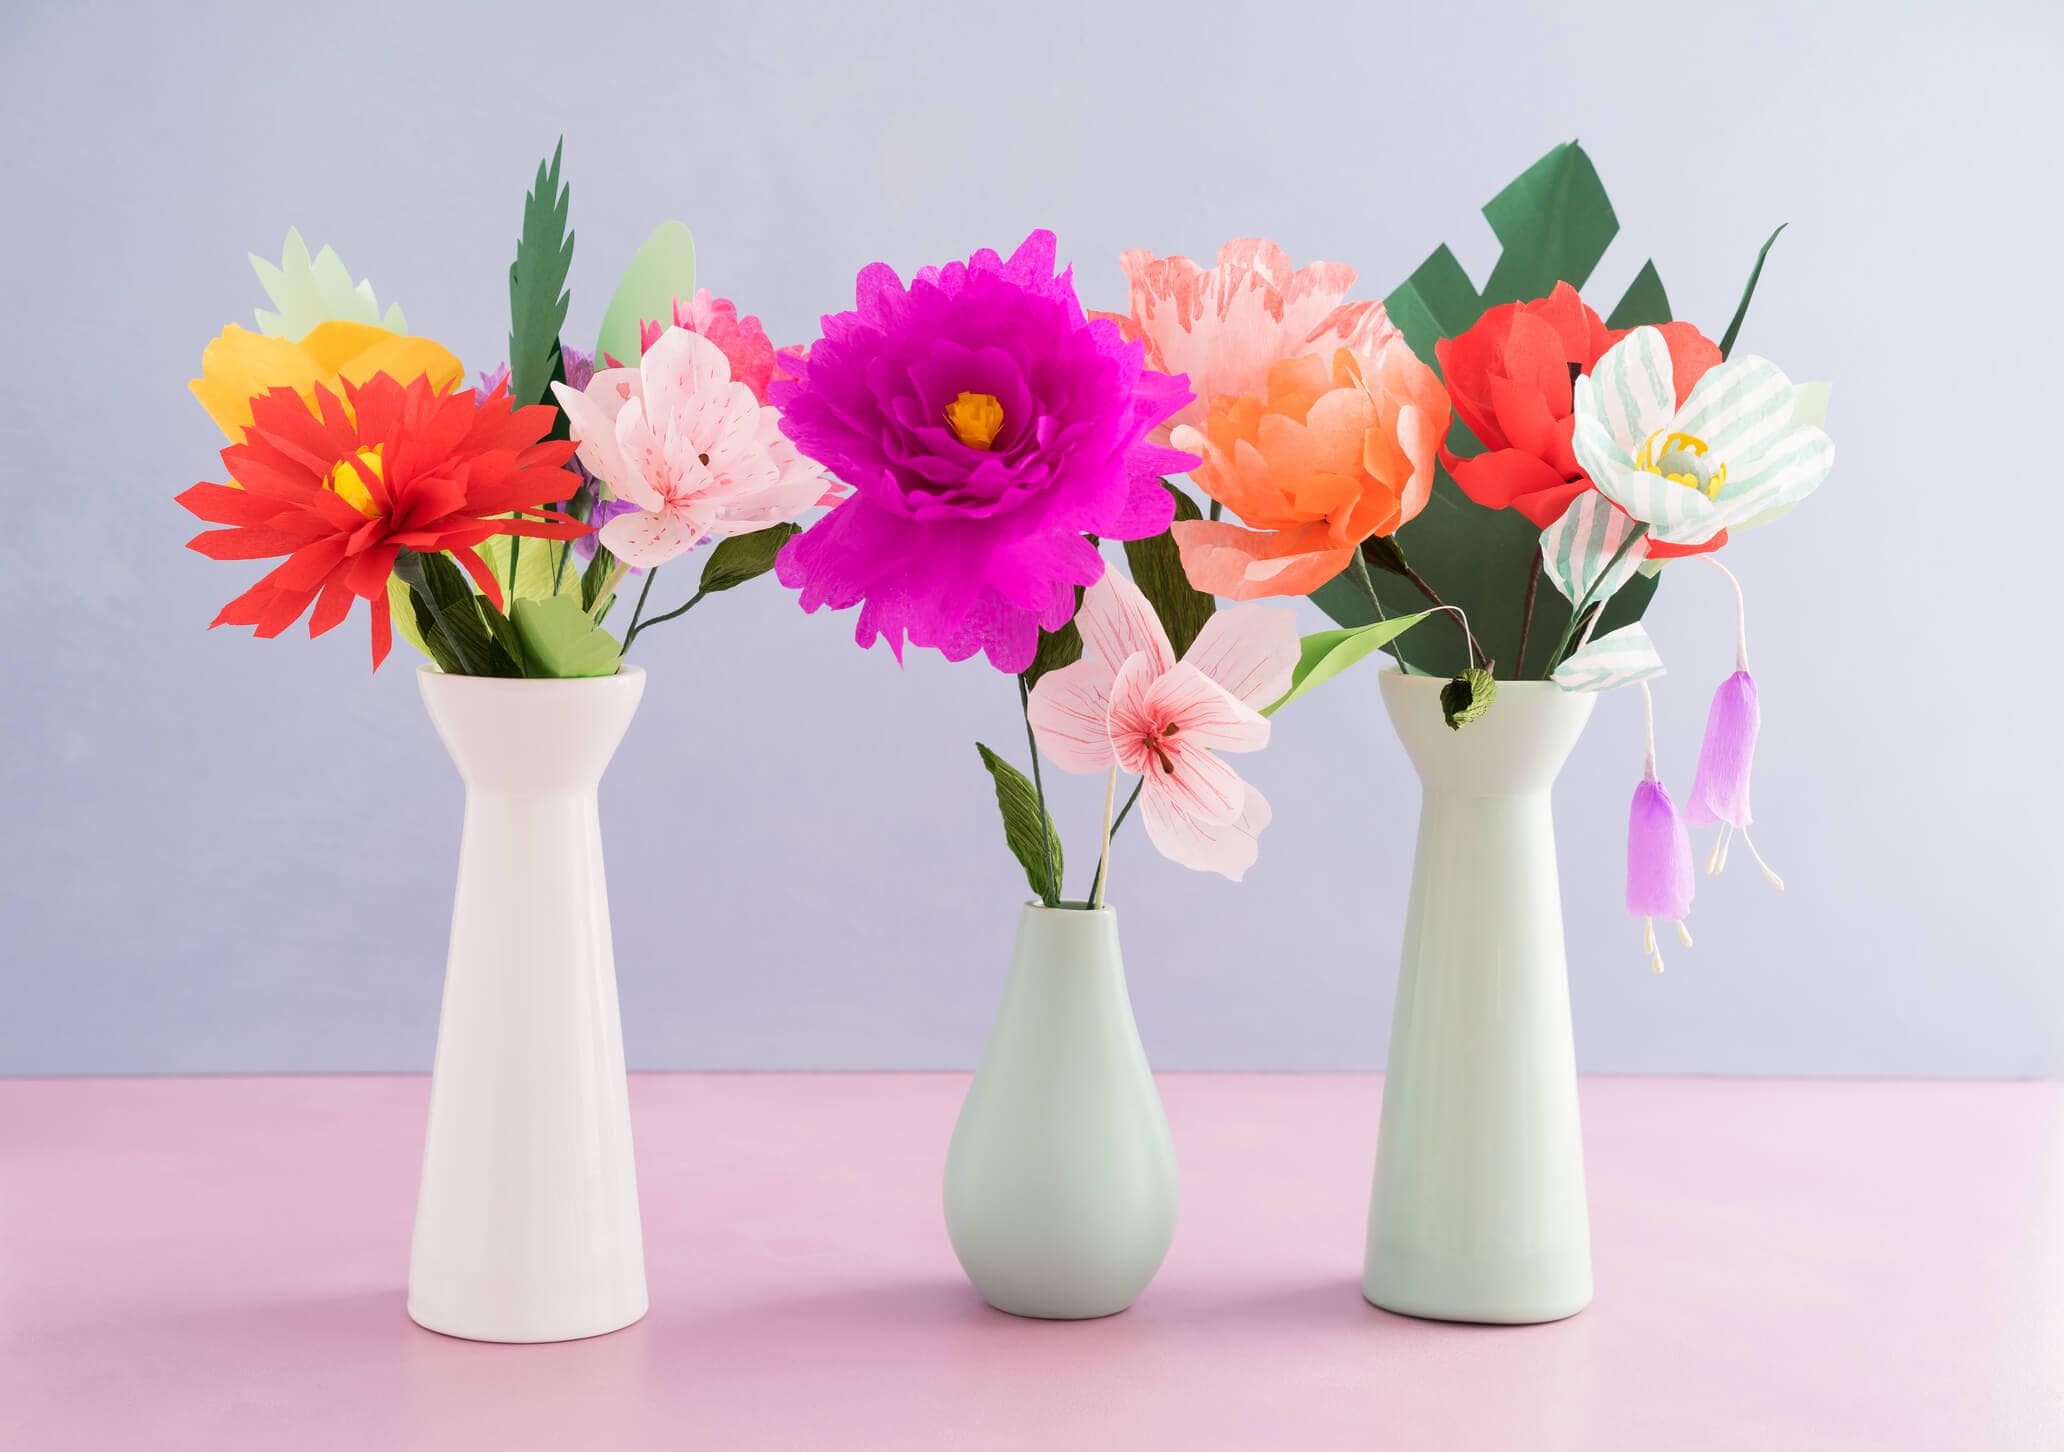 Three flower vases filled with colorful crepe paper flowers, sitting on a pink tabletop in front of a lavender background.